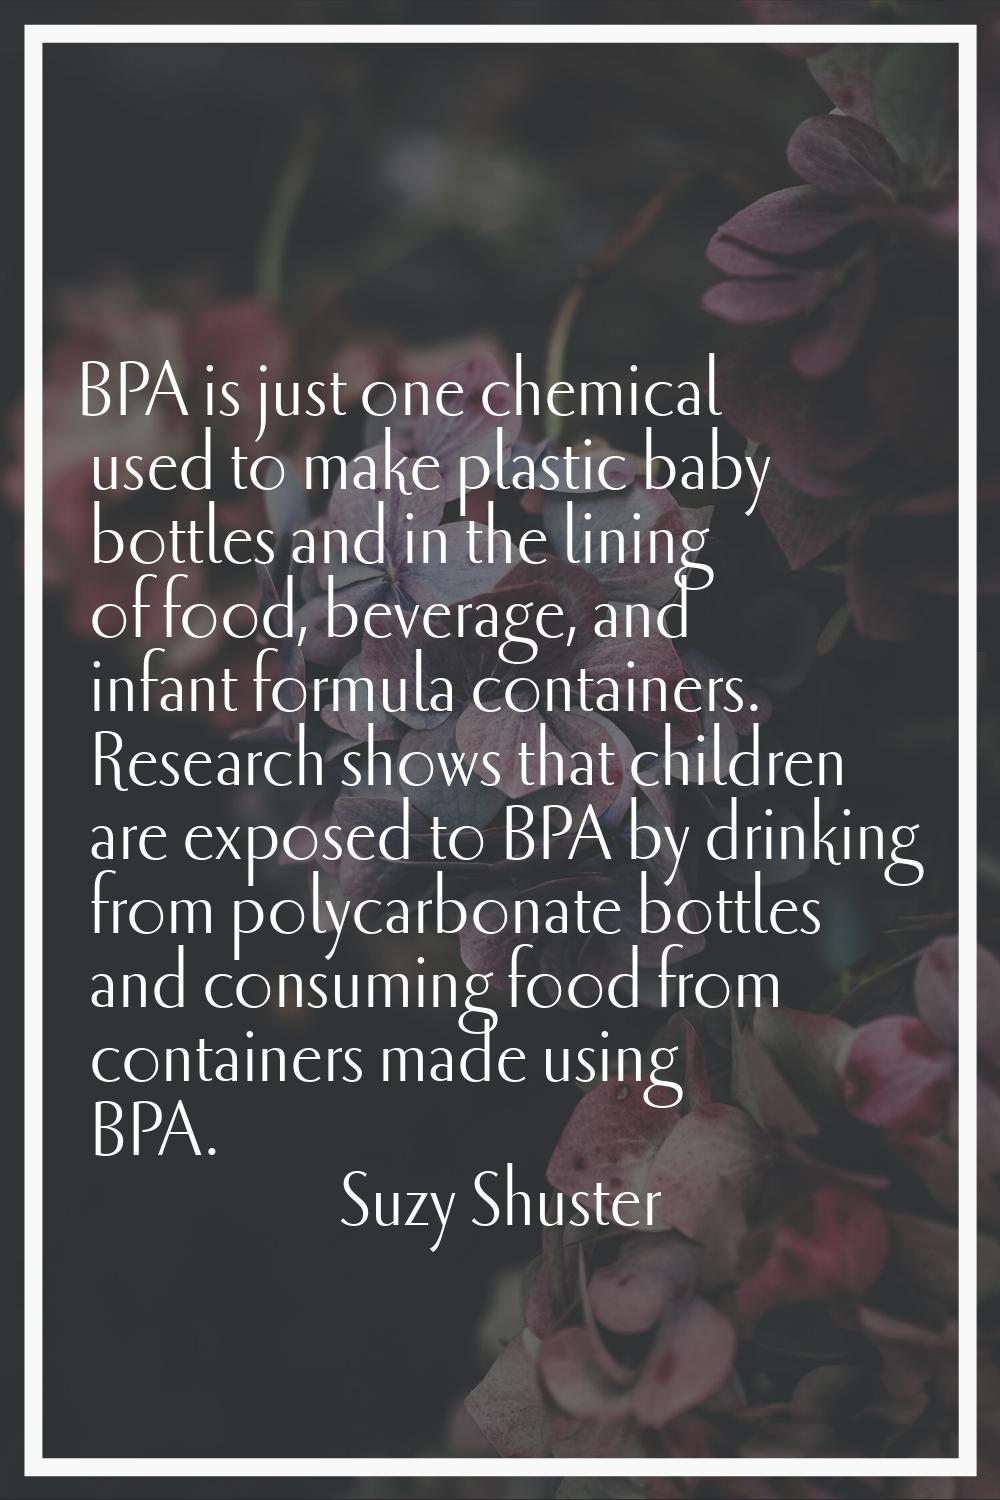 BPA is just one chemical used to make plastic baby bottles and in the lining of food, beverage, and